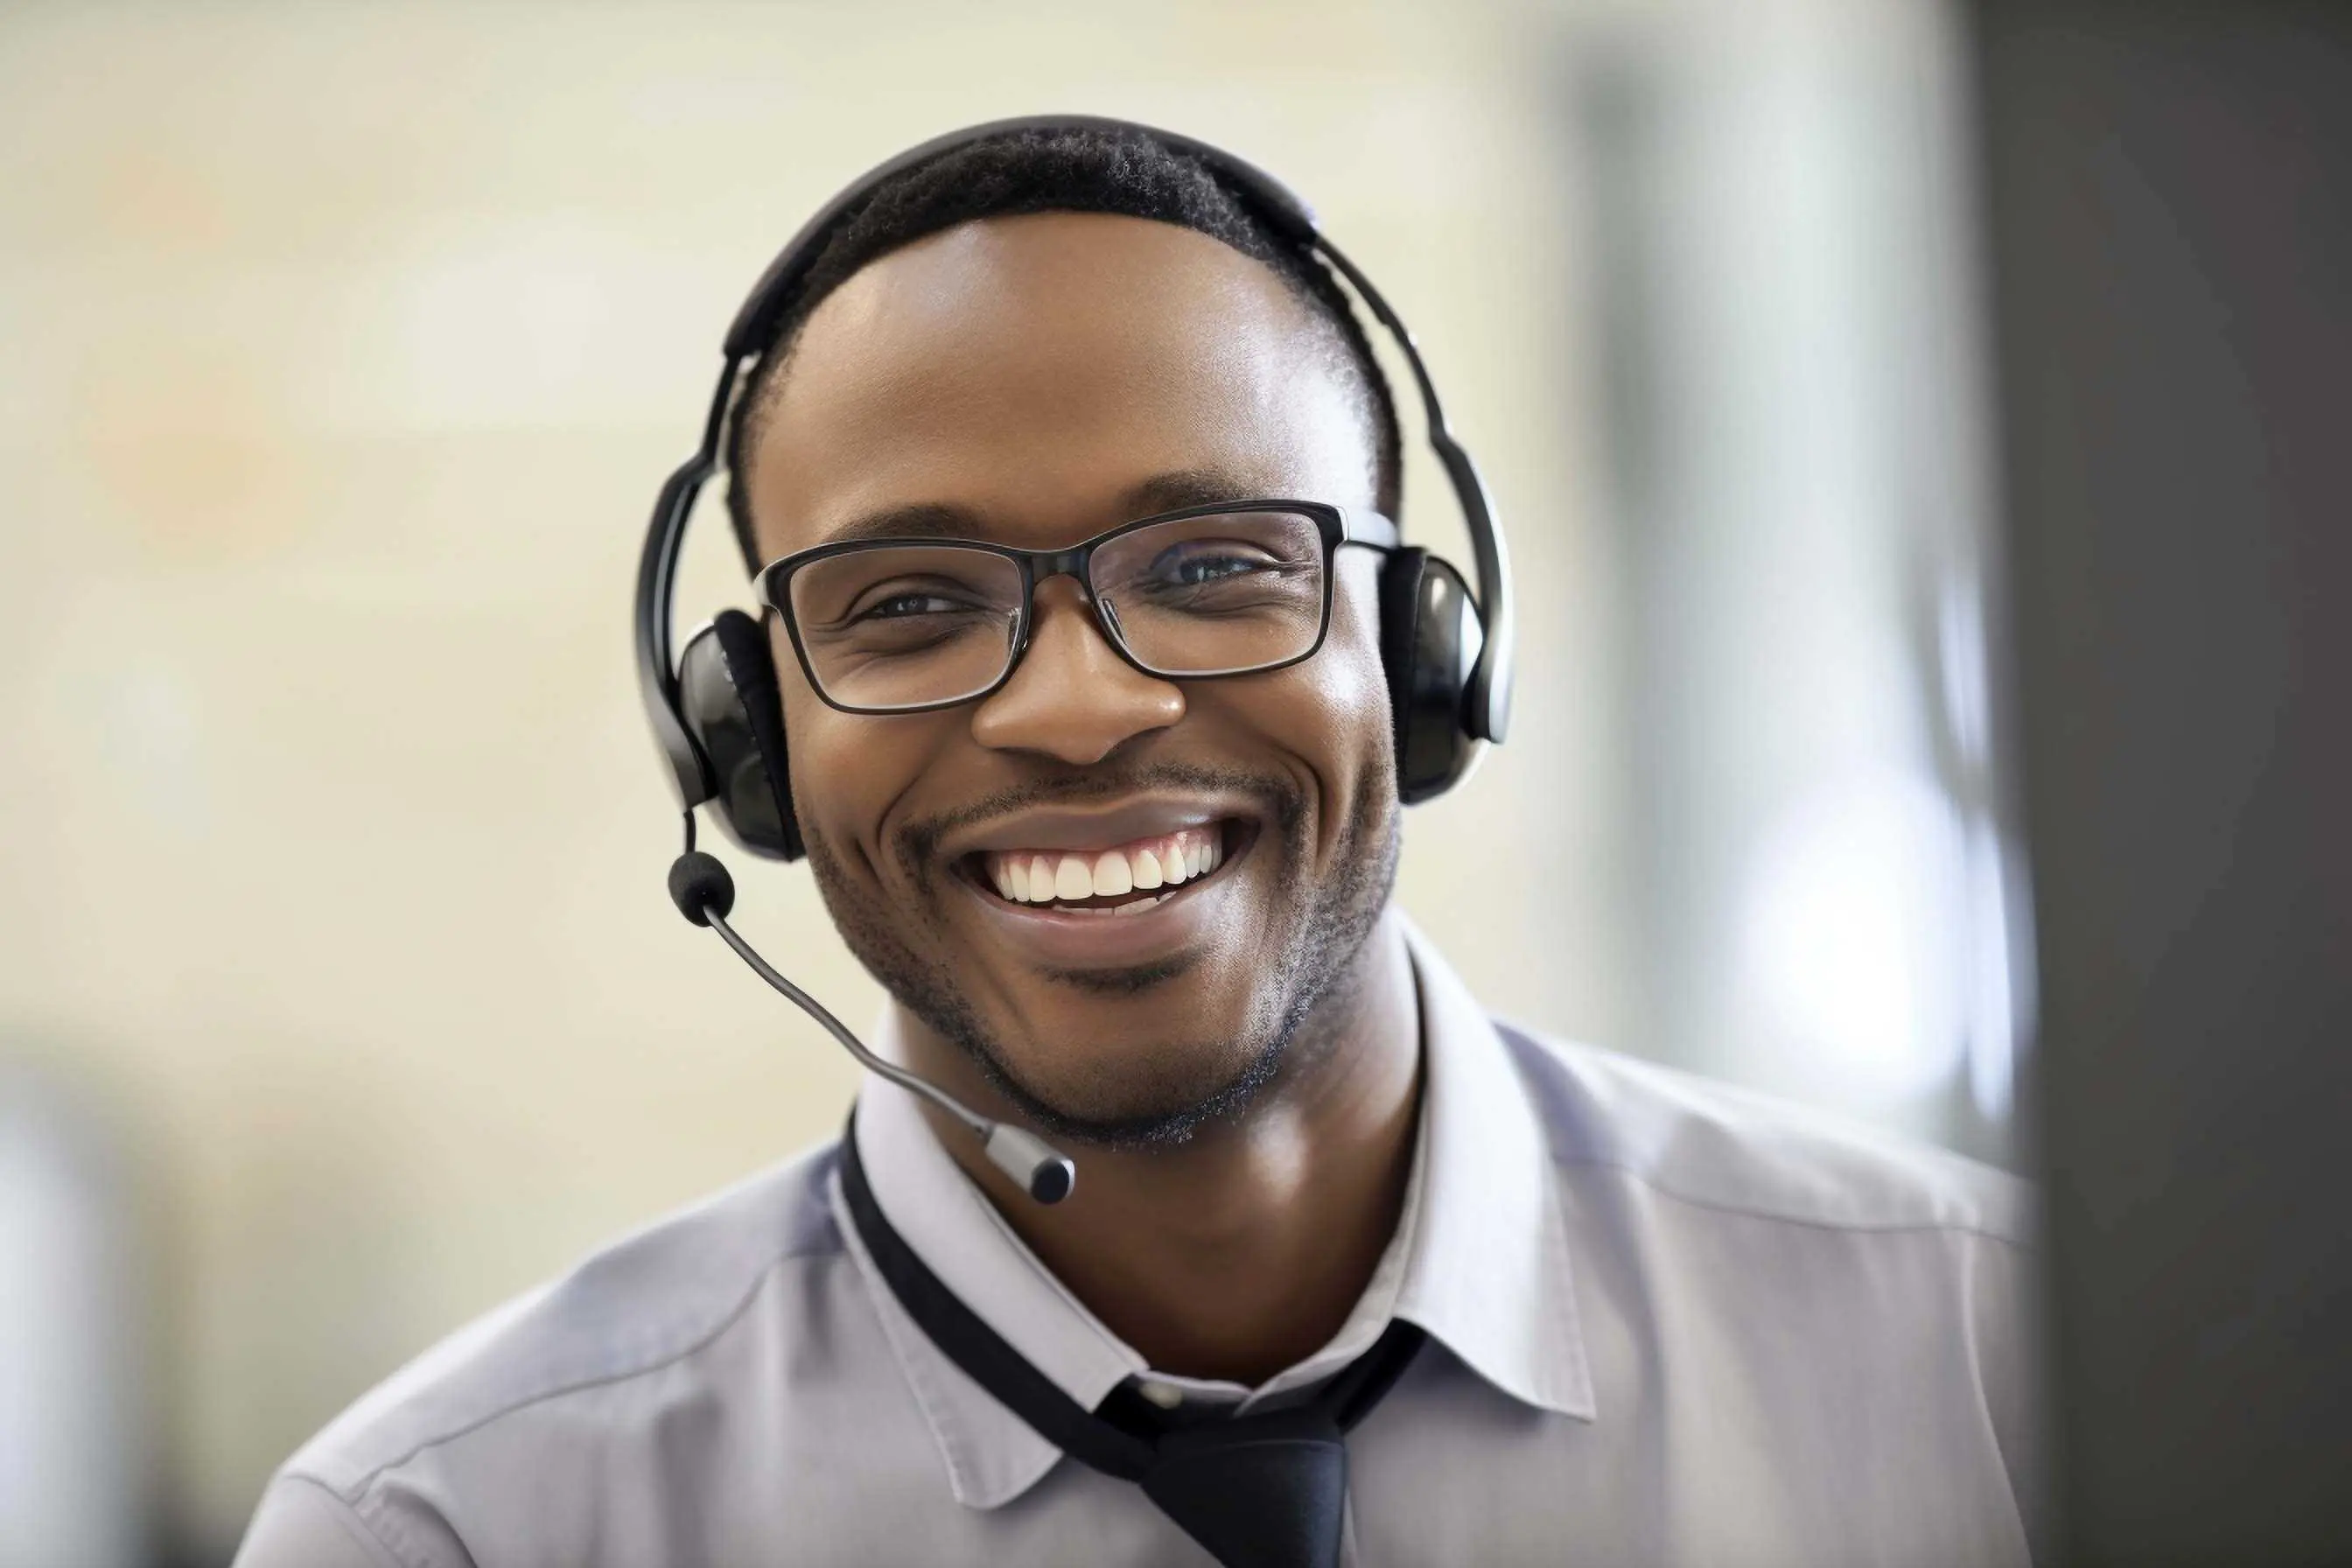 a happy salesman, smiling, with a headset on, representing a cold caller